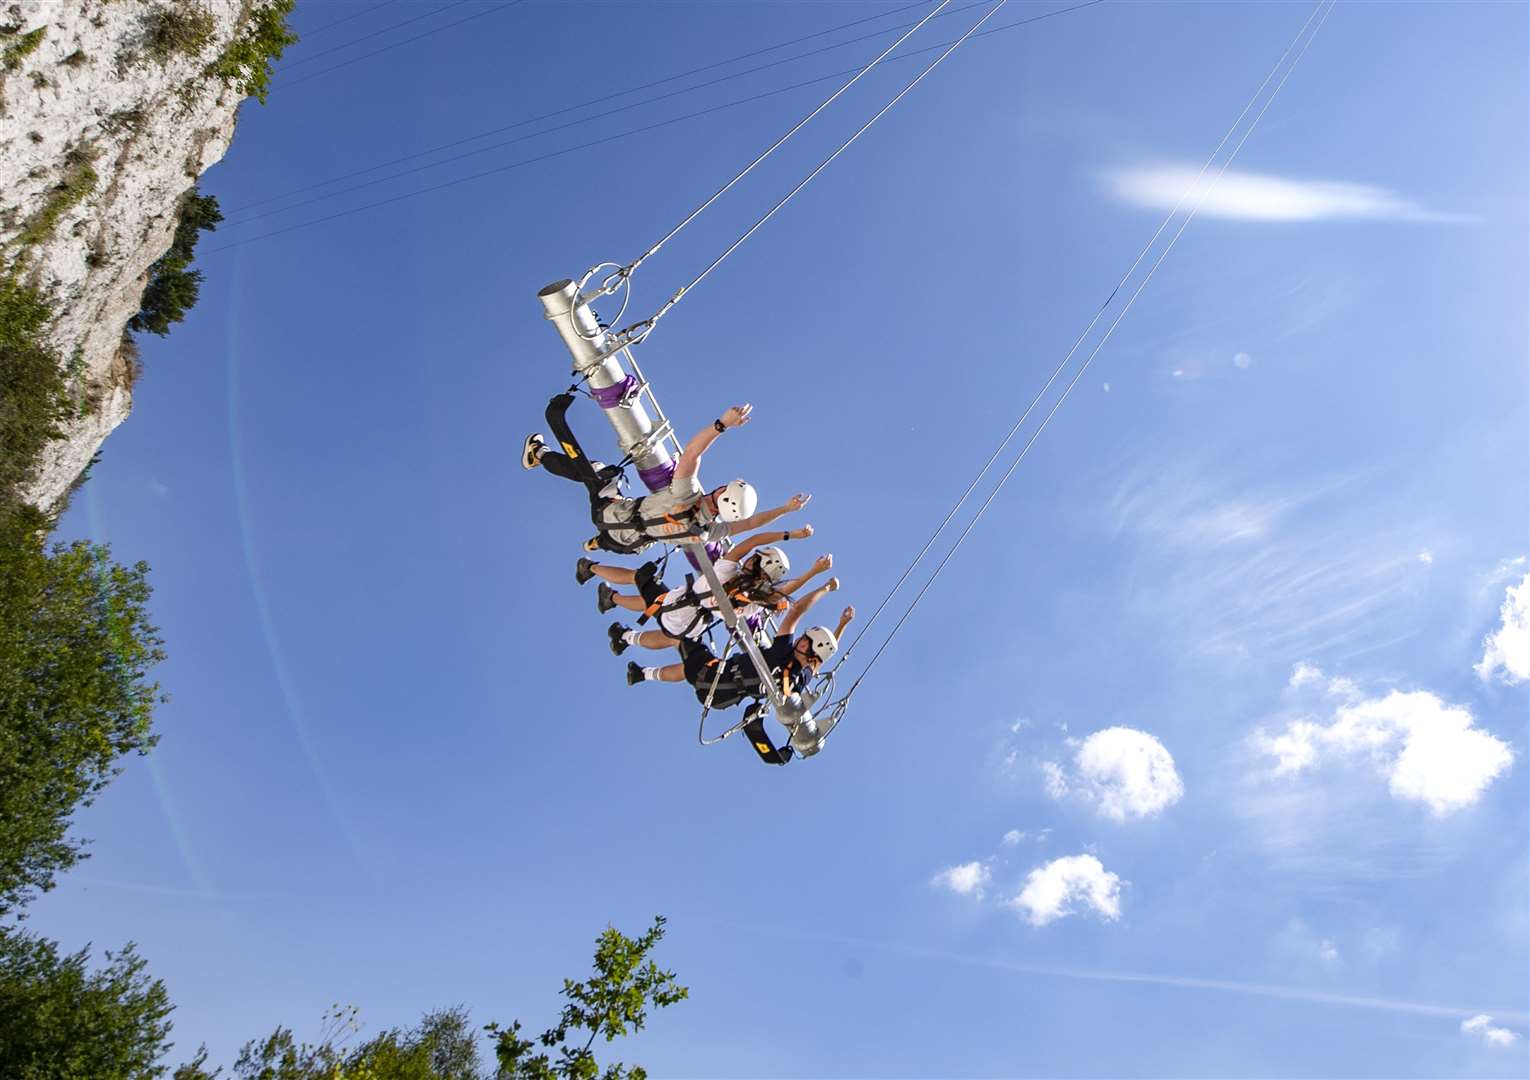 Riders will be swung from a 46 metre drop. Picture: John Nguyen/PA Wire